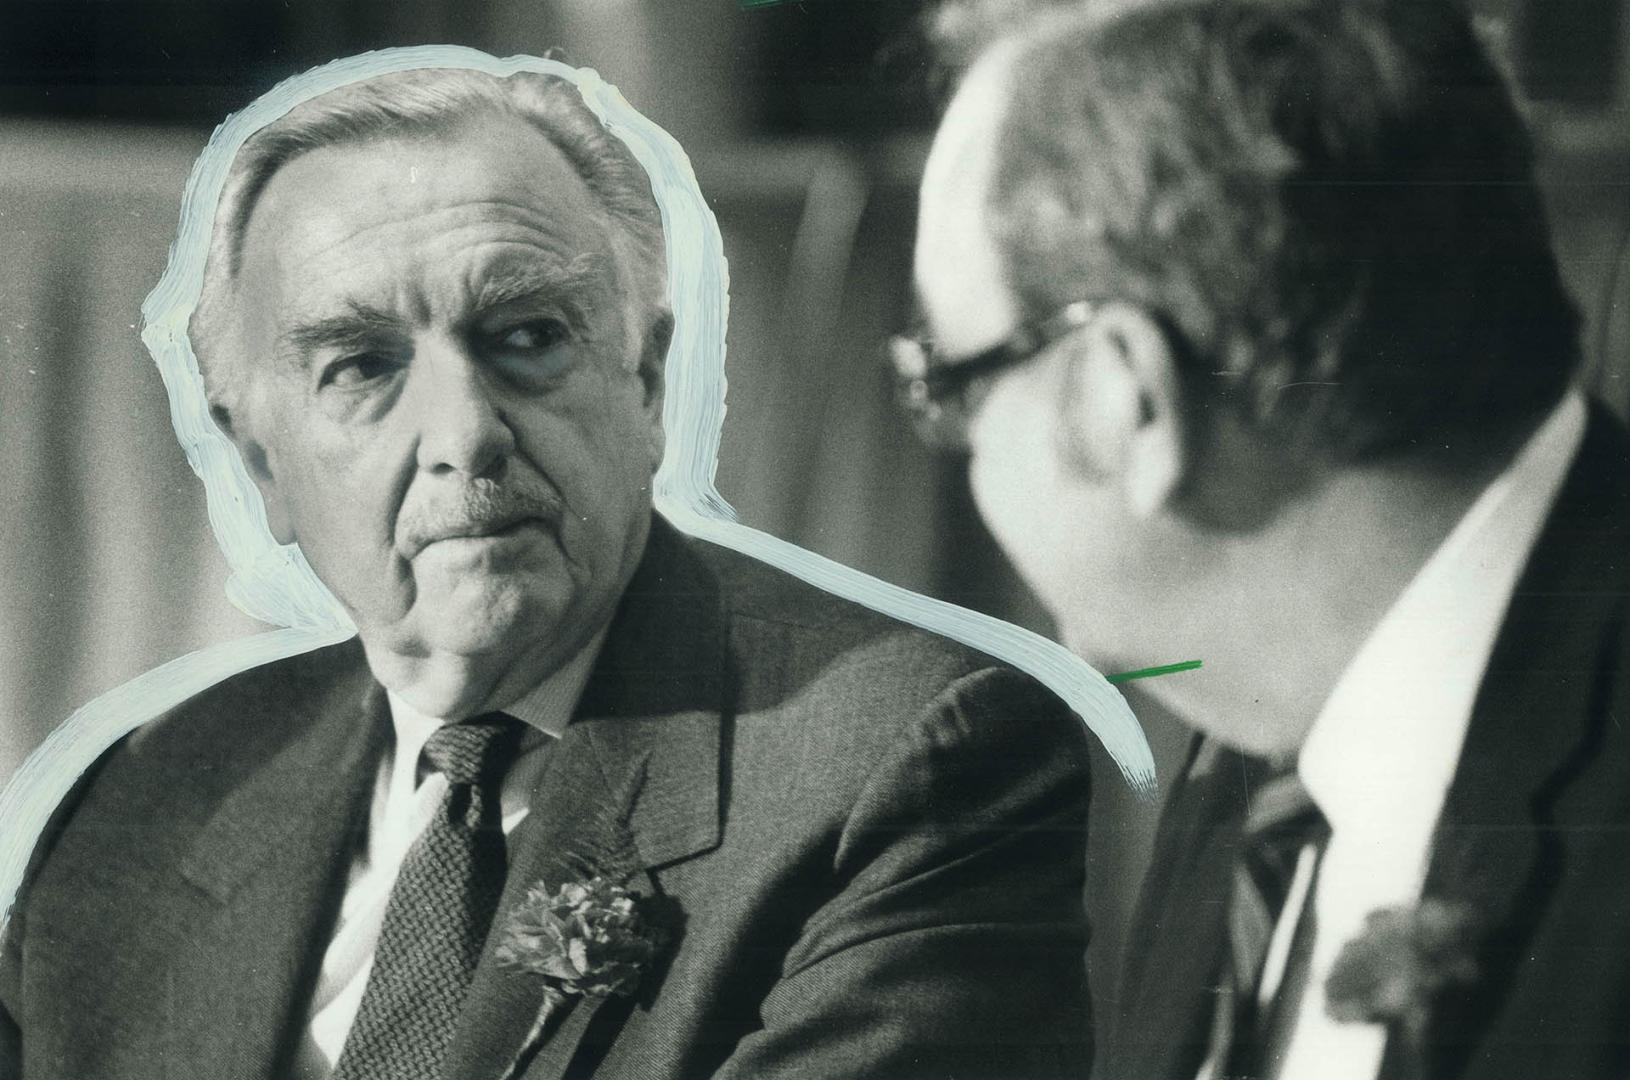 Walter Cronkite laments state of TV news